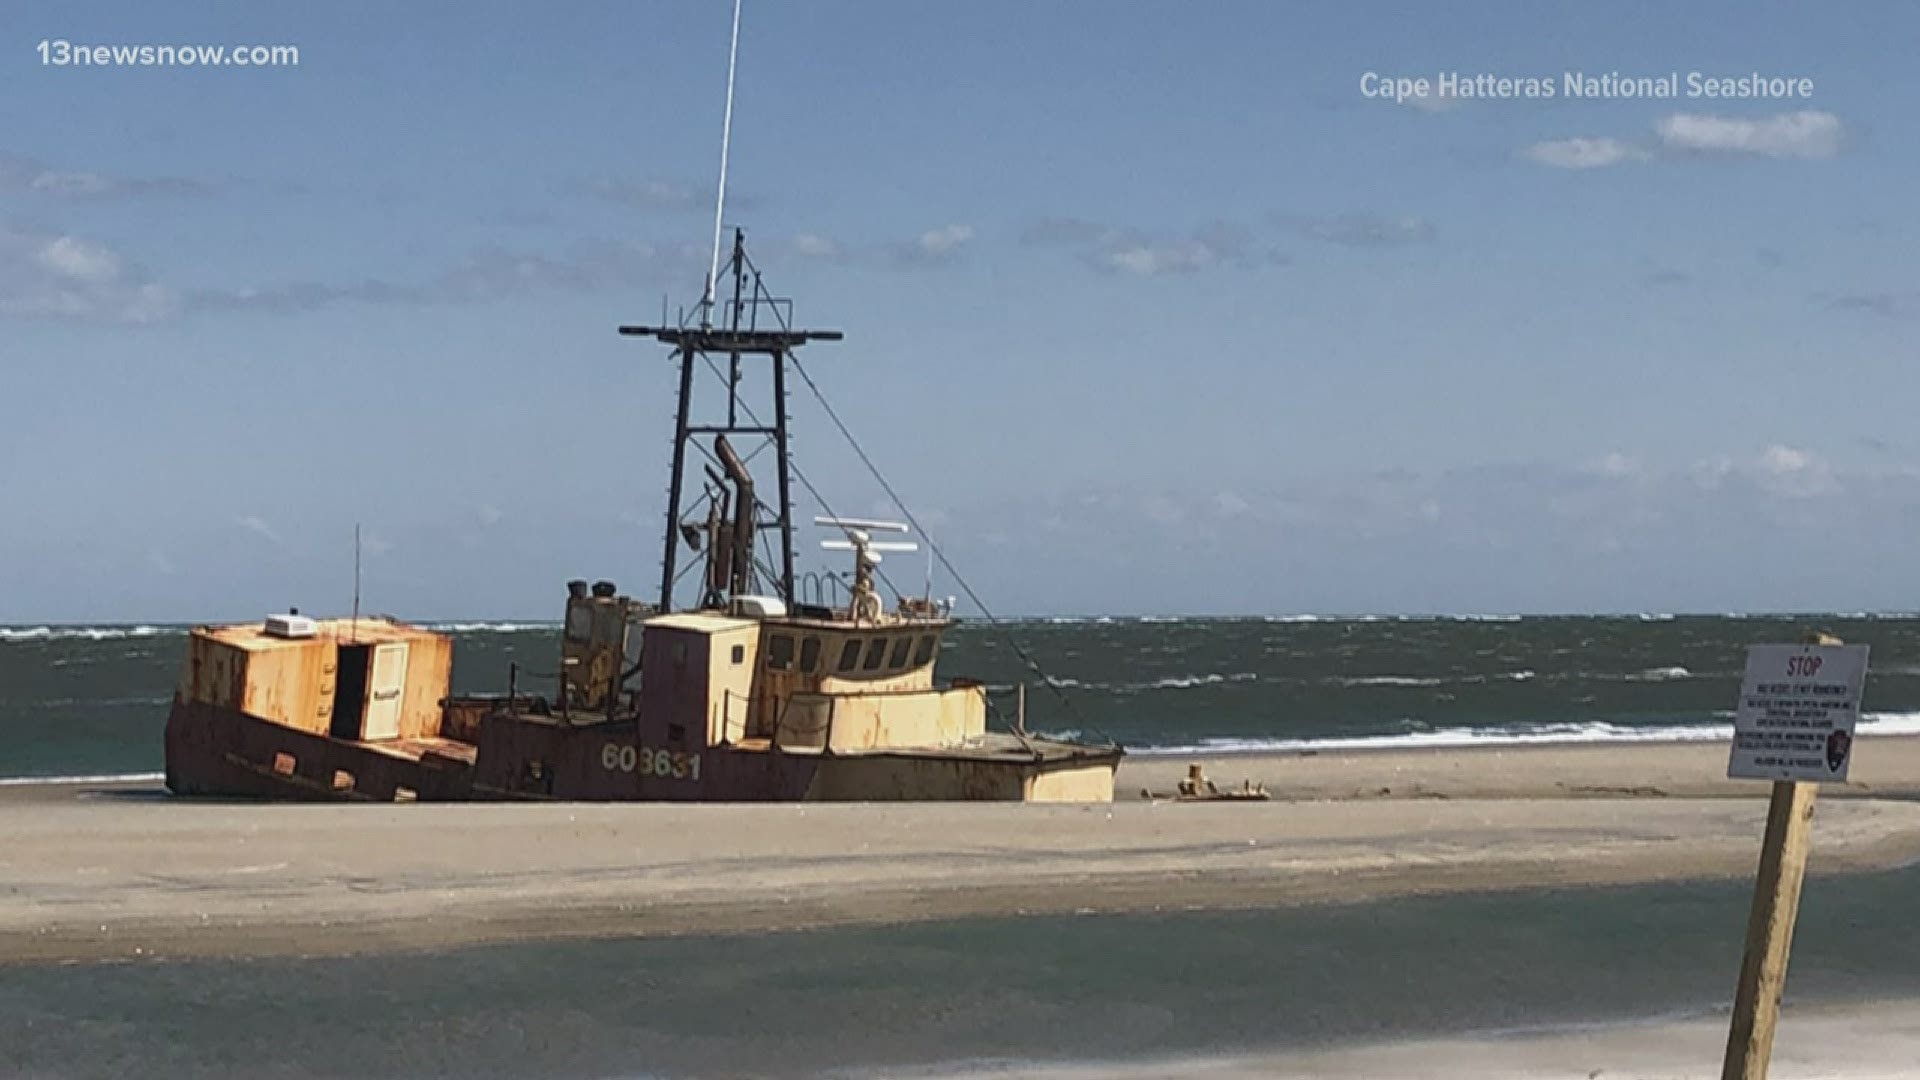 The Ocean Pursuit has been grounded at Cape Hatteras National Seashore since March 1. Its crew was rescued by the U.S. Coast Guard.